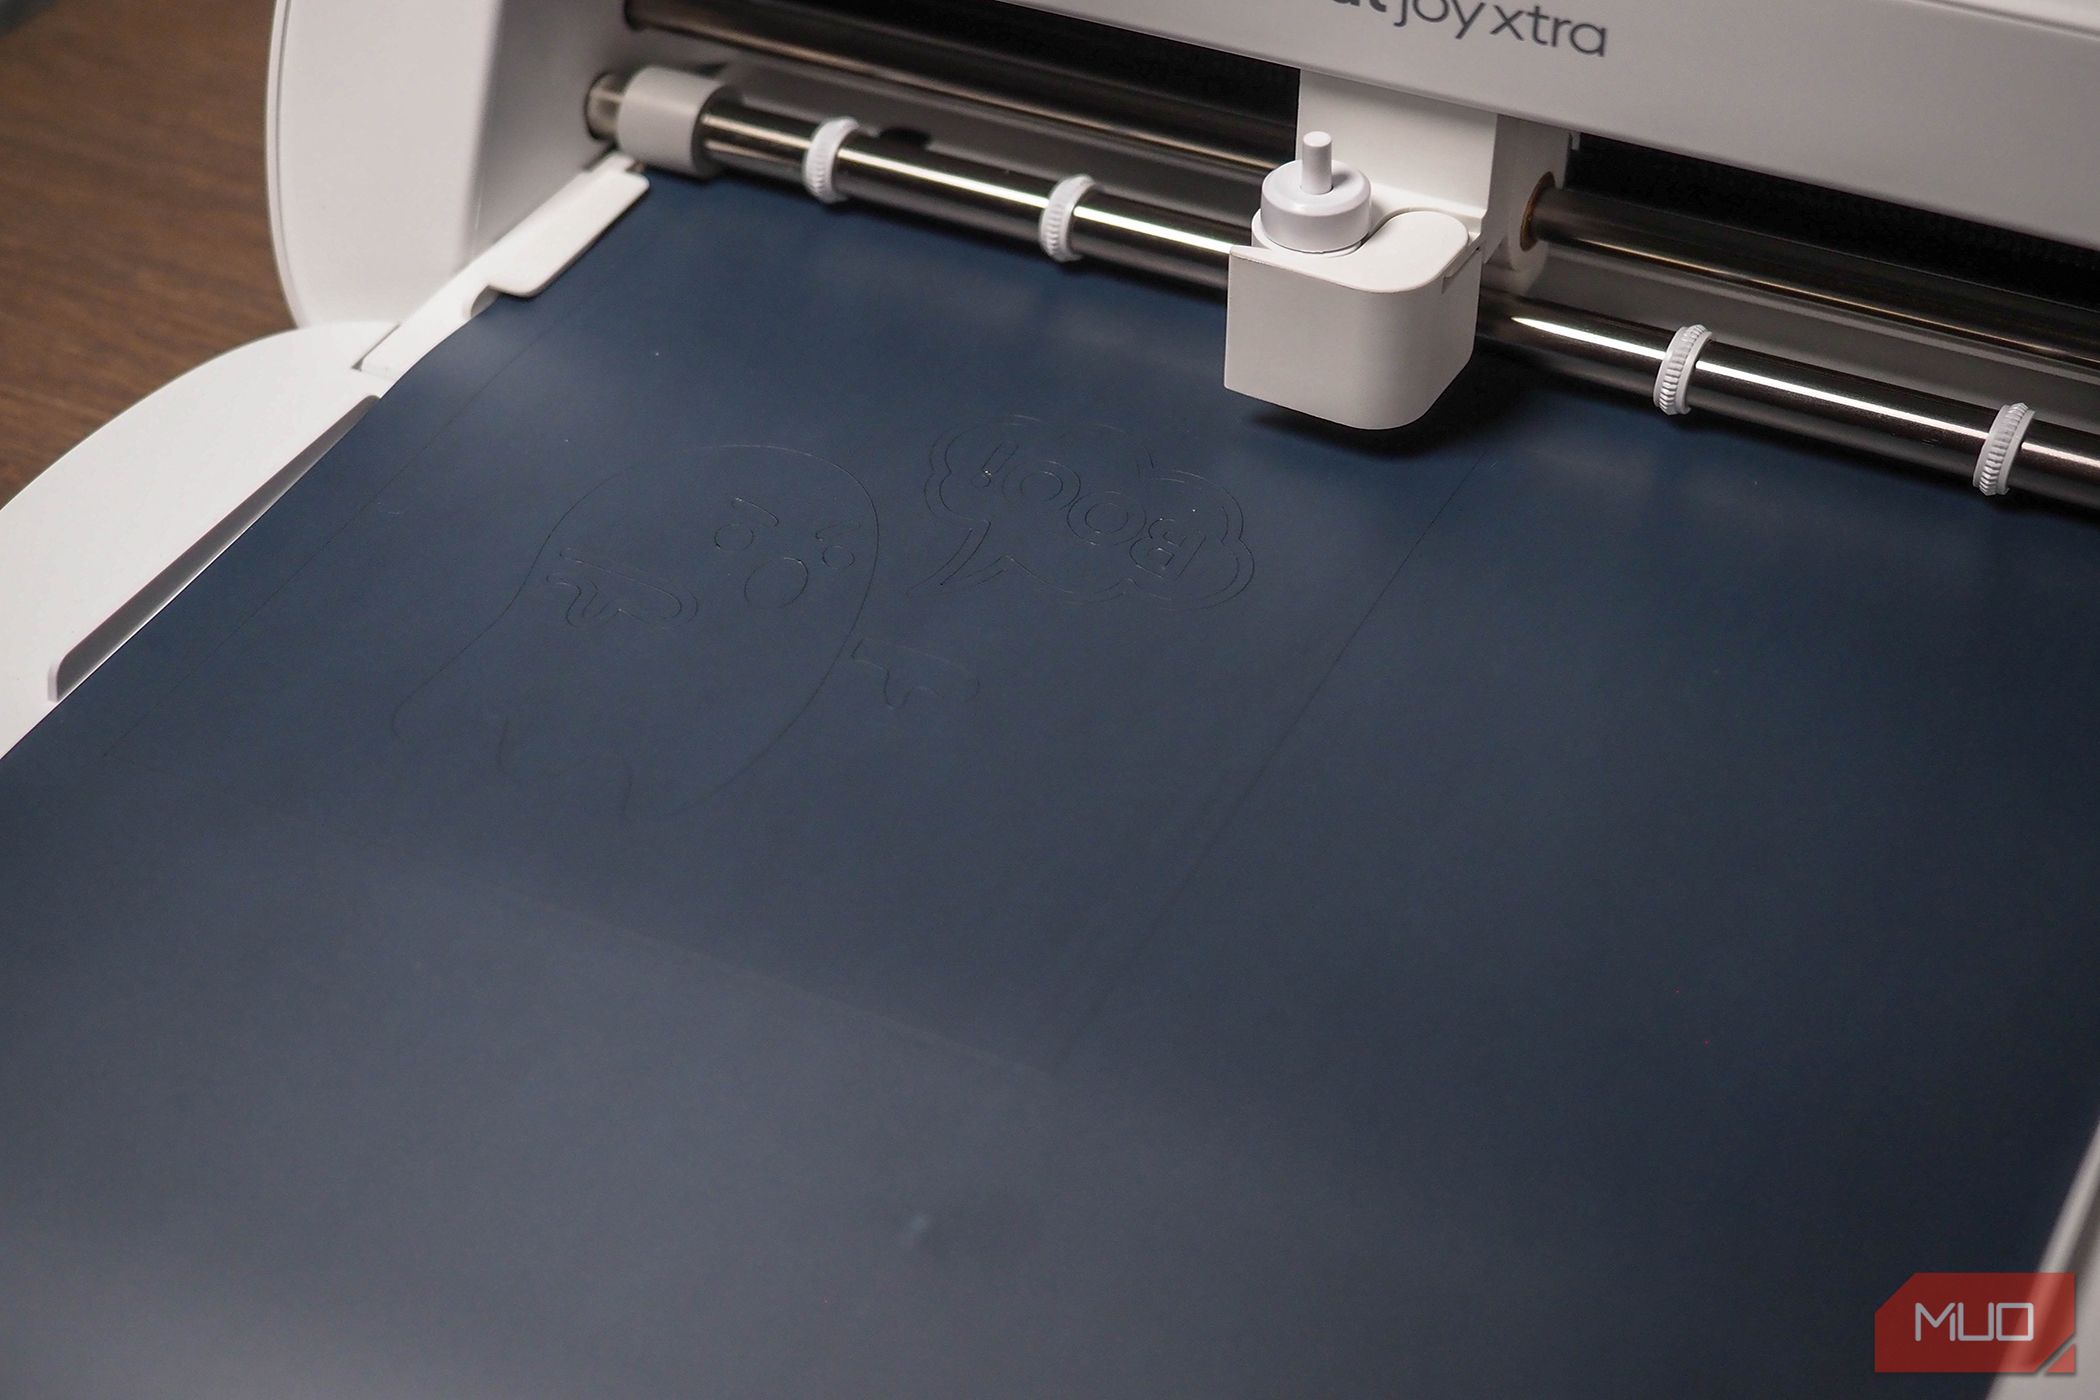 Cricut Joy Xtra Review: an incredibly accurate digital craft cutter